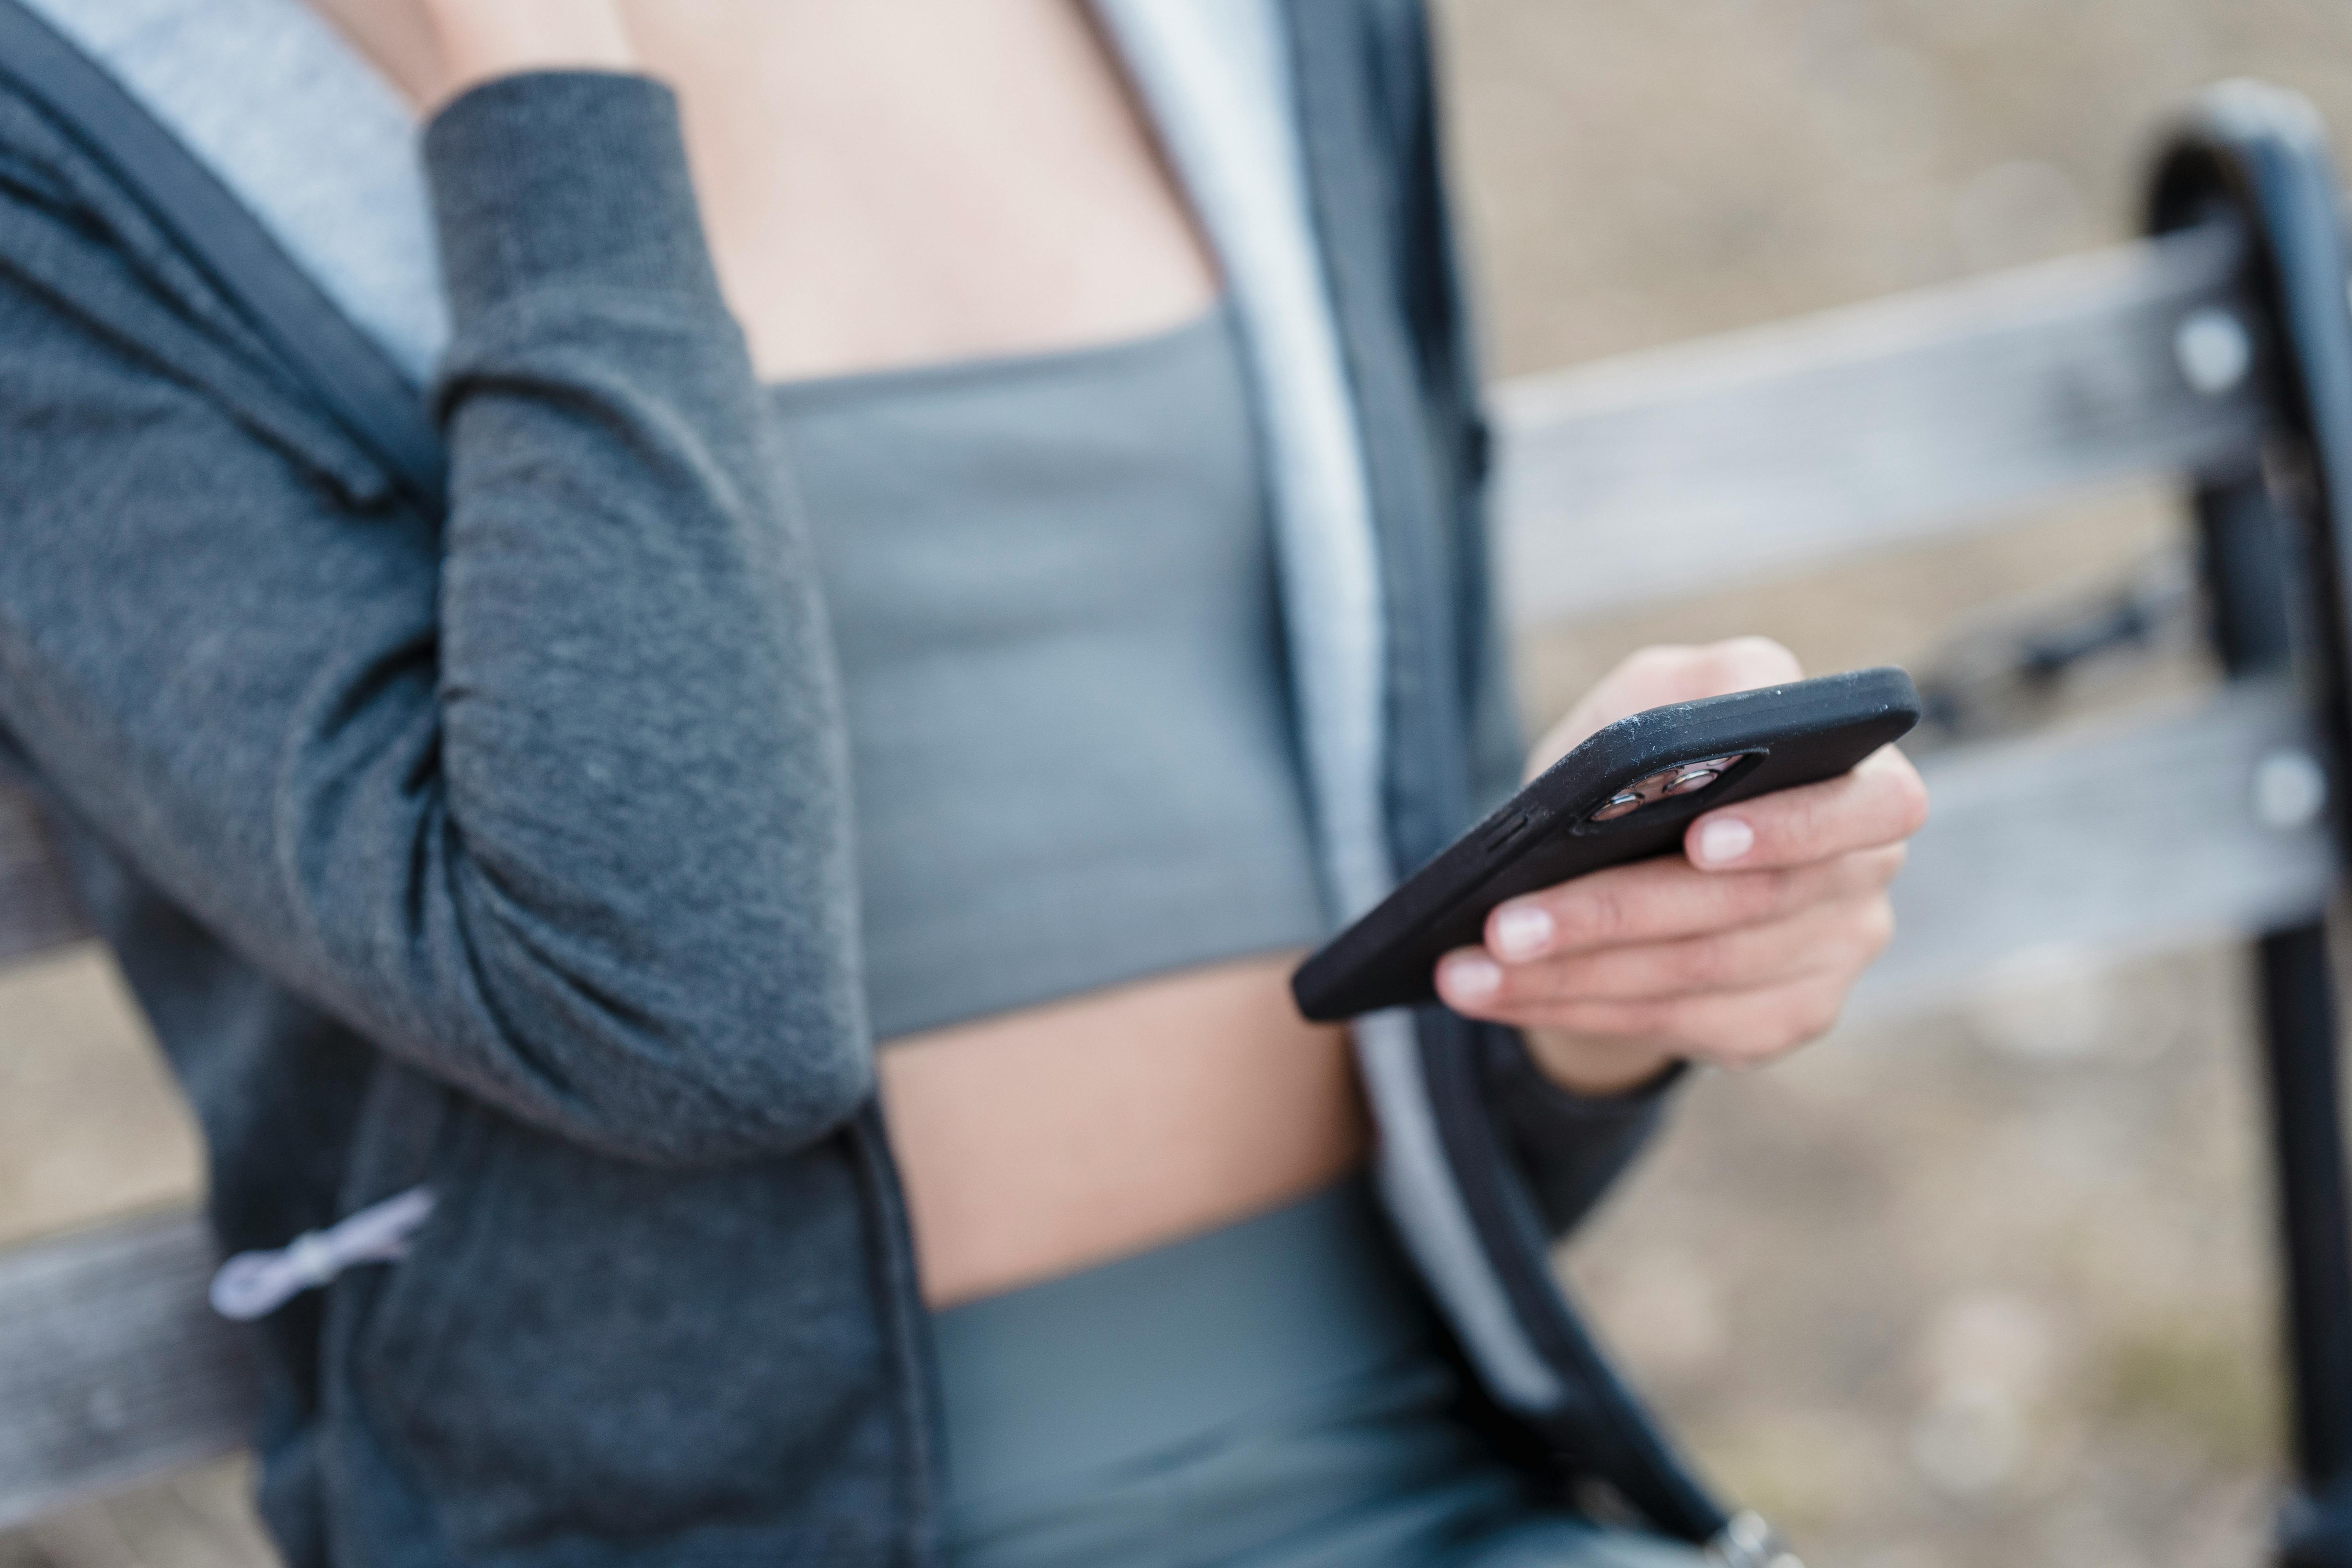 A person using their smartphone | Source: Pexels